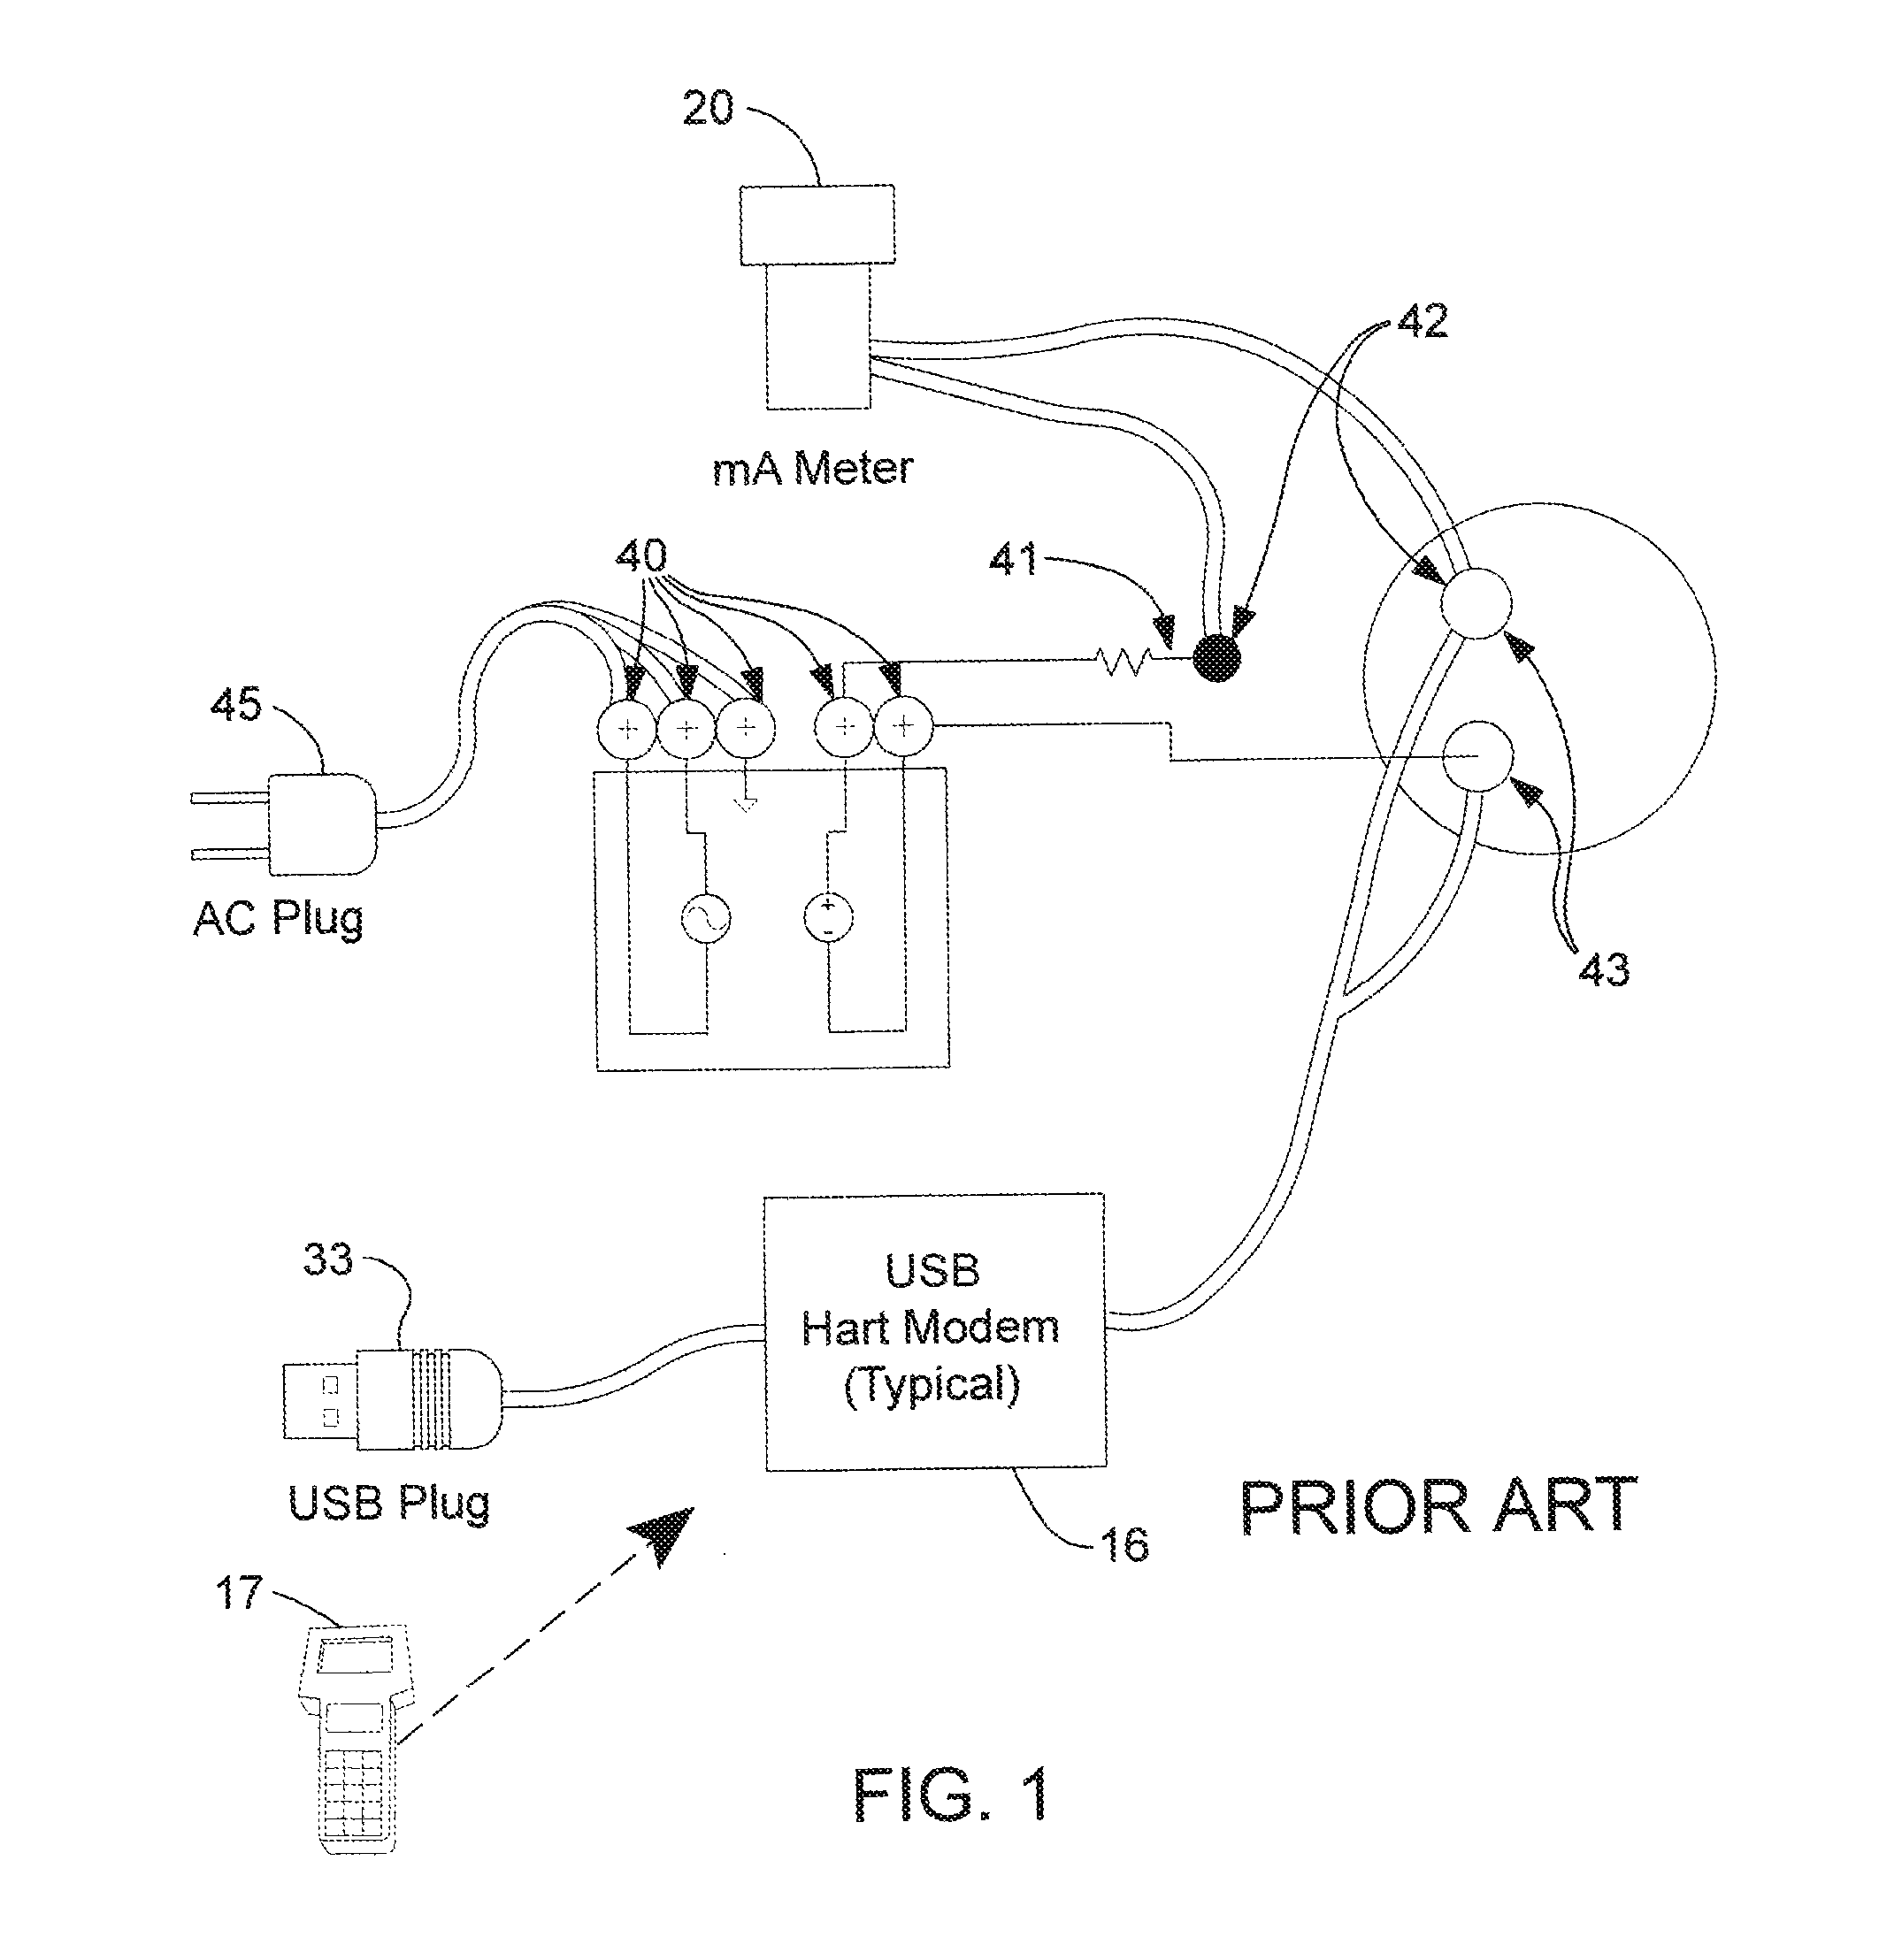 Apparatus and method to power 2-wire field devices, including HART, foundation fieldbus, and profibus PA, for configuration